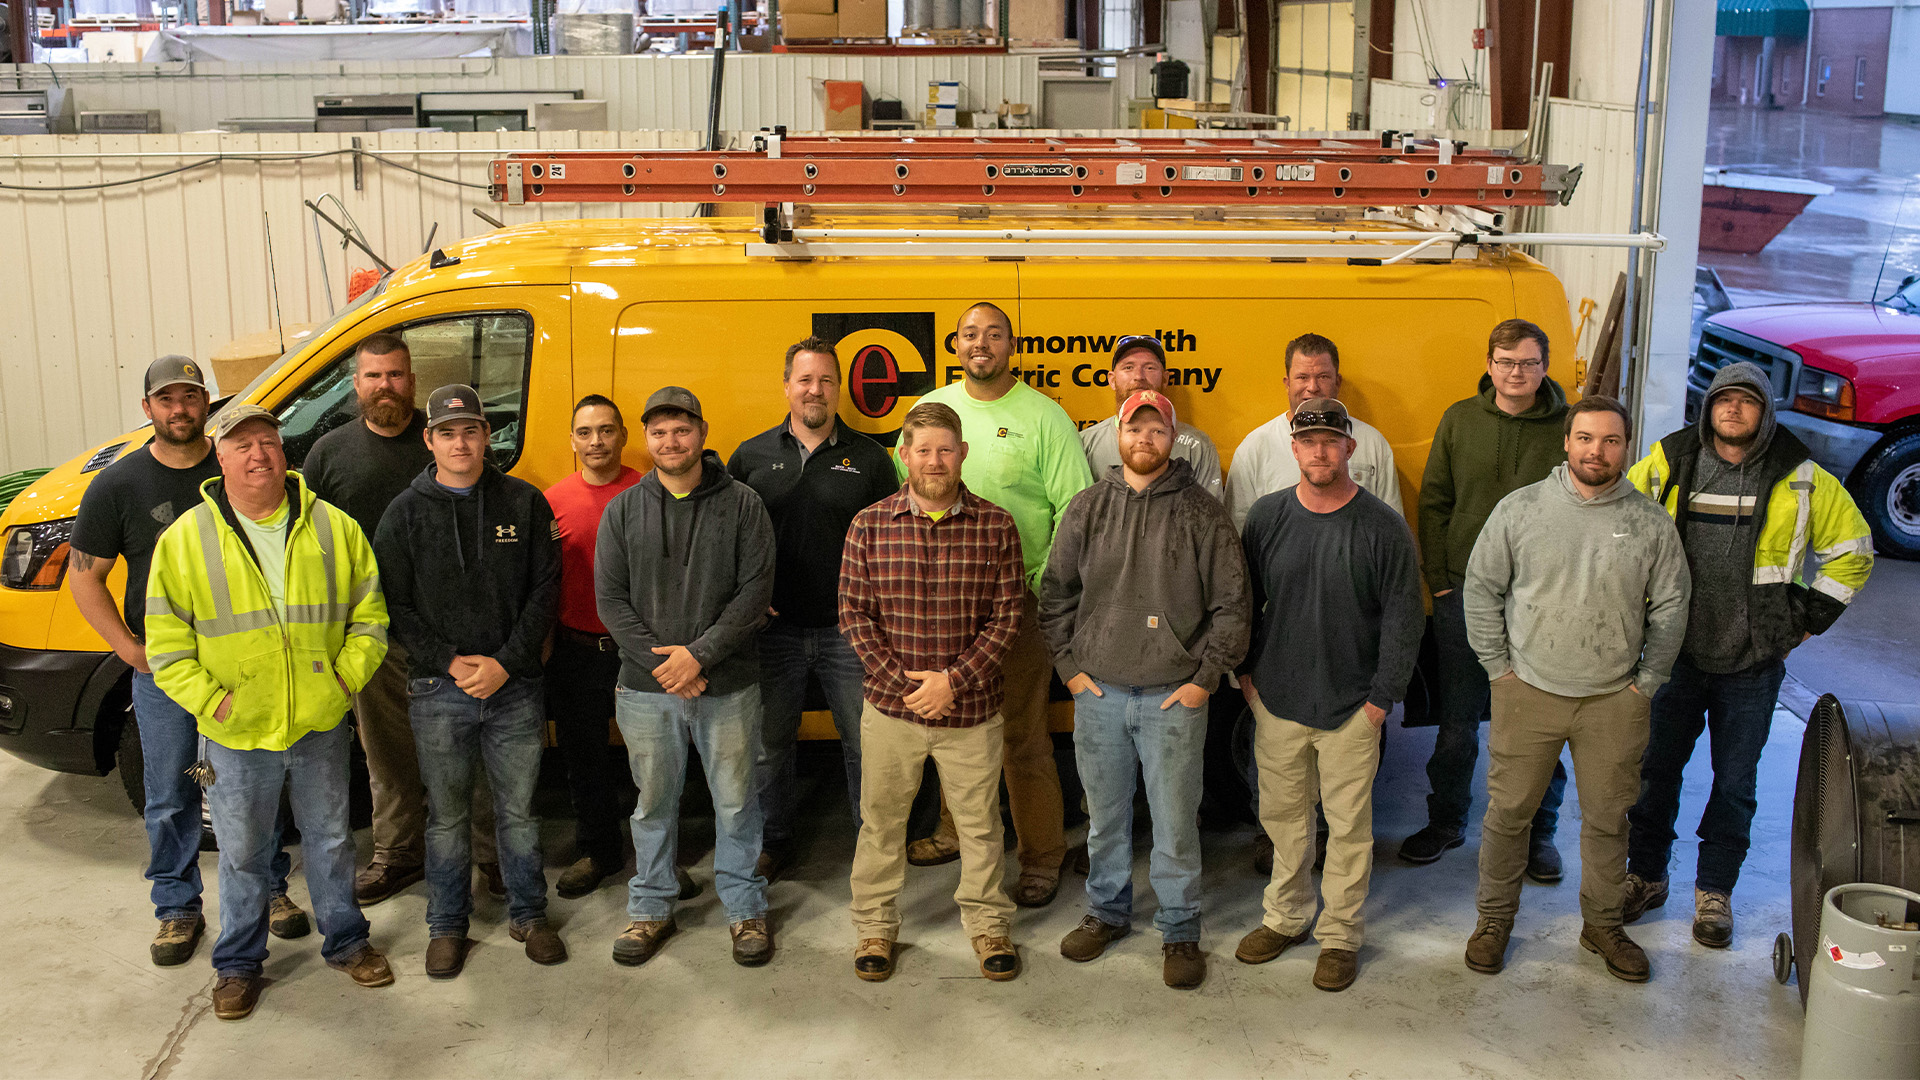 Commonwealth Electric's Lincoln Service team stands in front of a yellow service van.